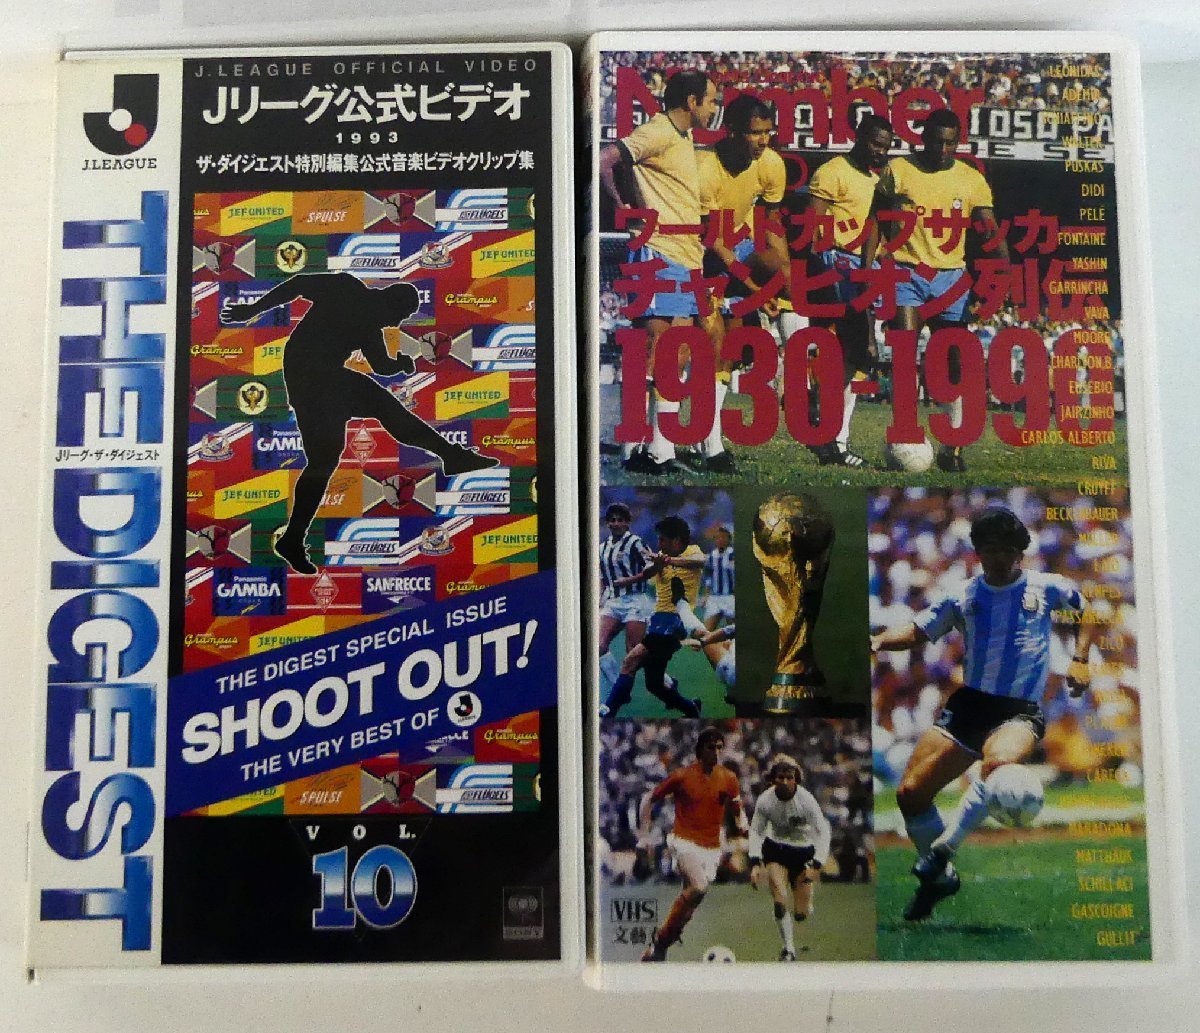 * video World Cup soccer Champion row .1930-1990/J Lee g official video The * large je -stroke VOL.10 2 pcs set USED goods *